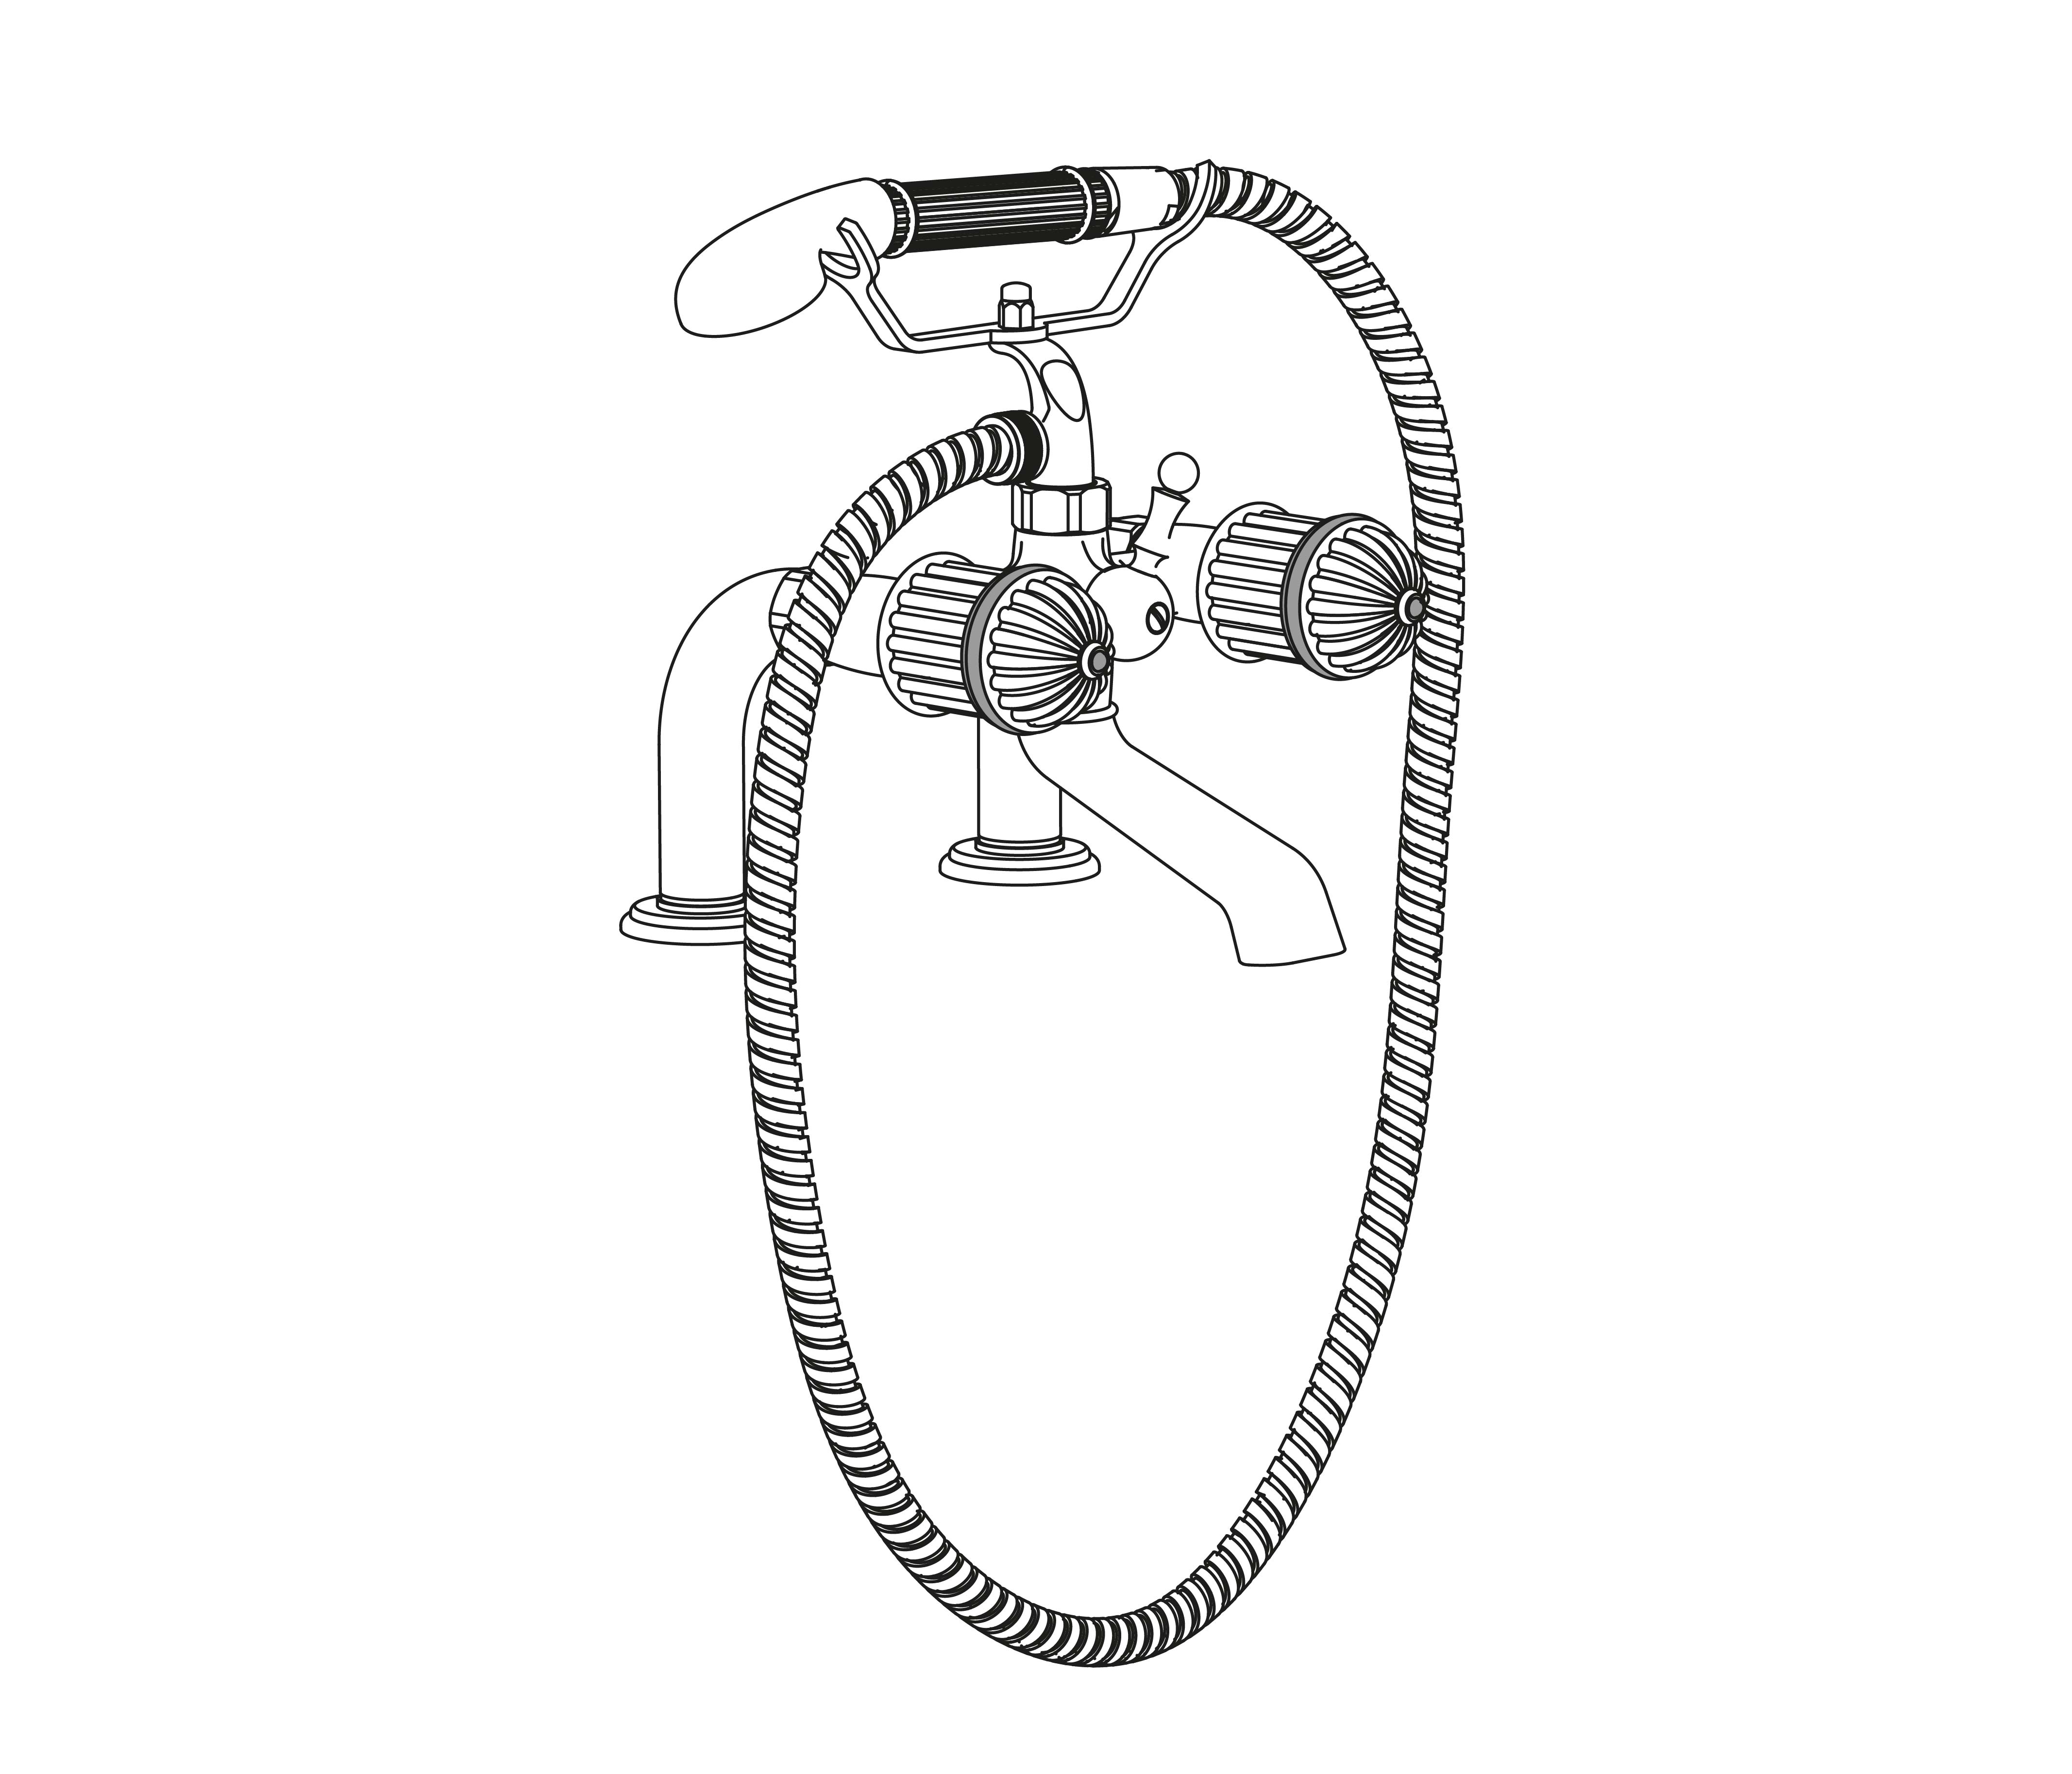 S182-3306 Rim mounted bath and shower mixer